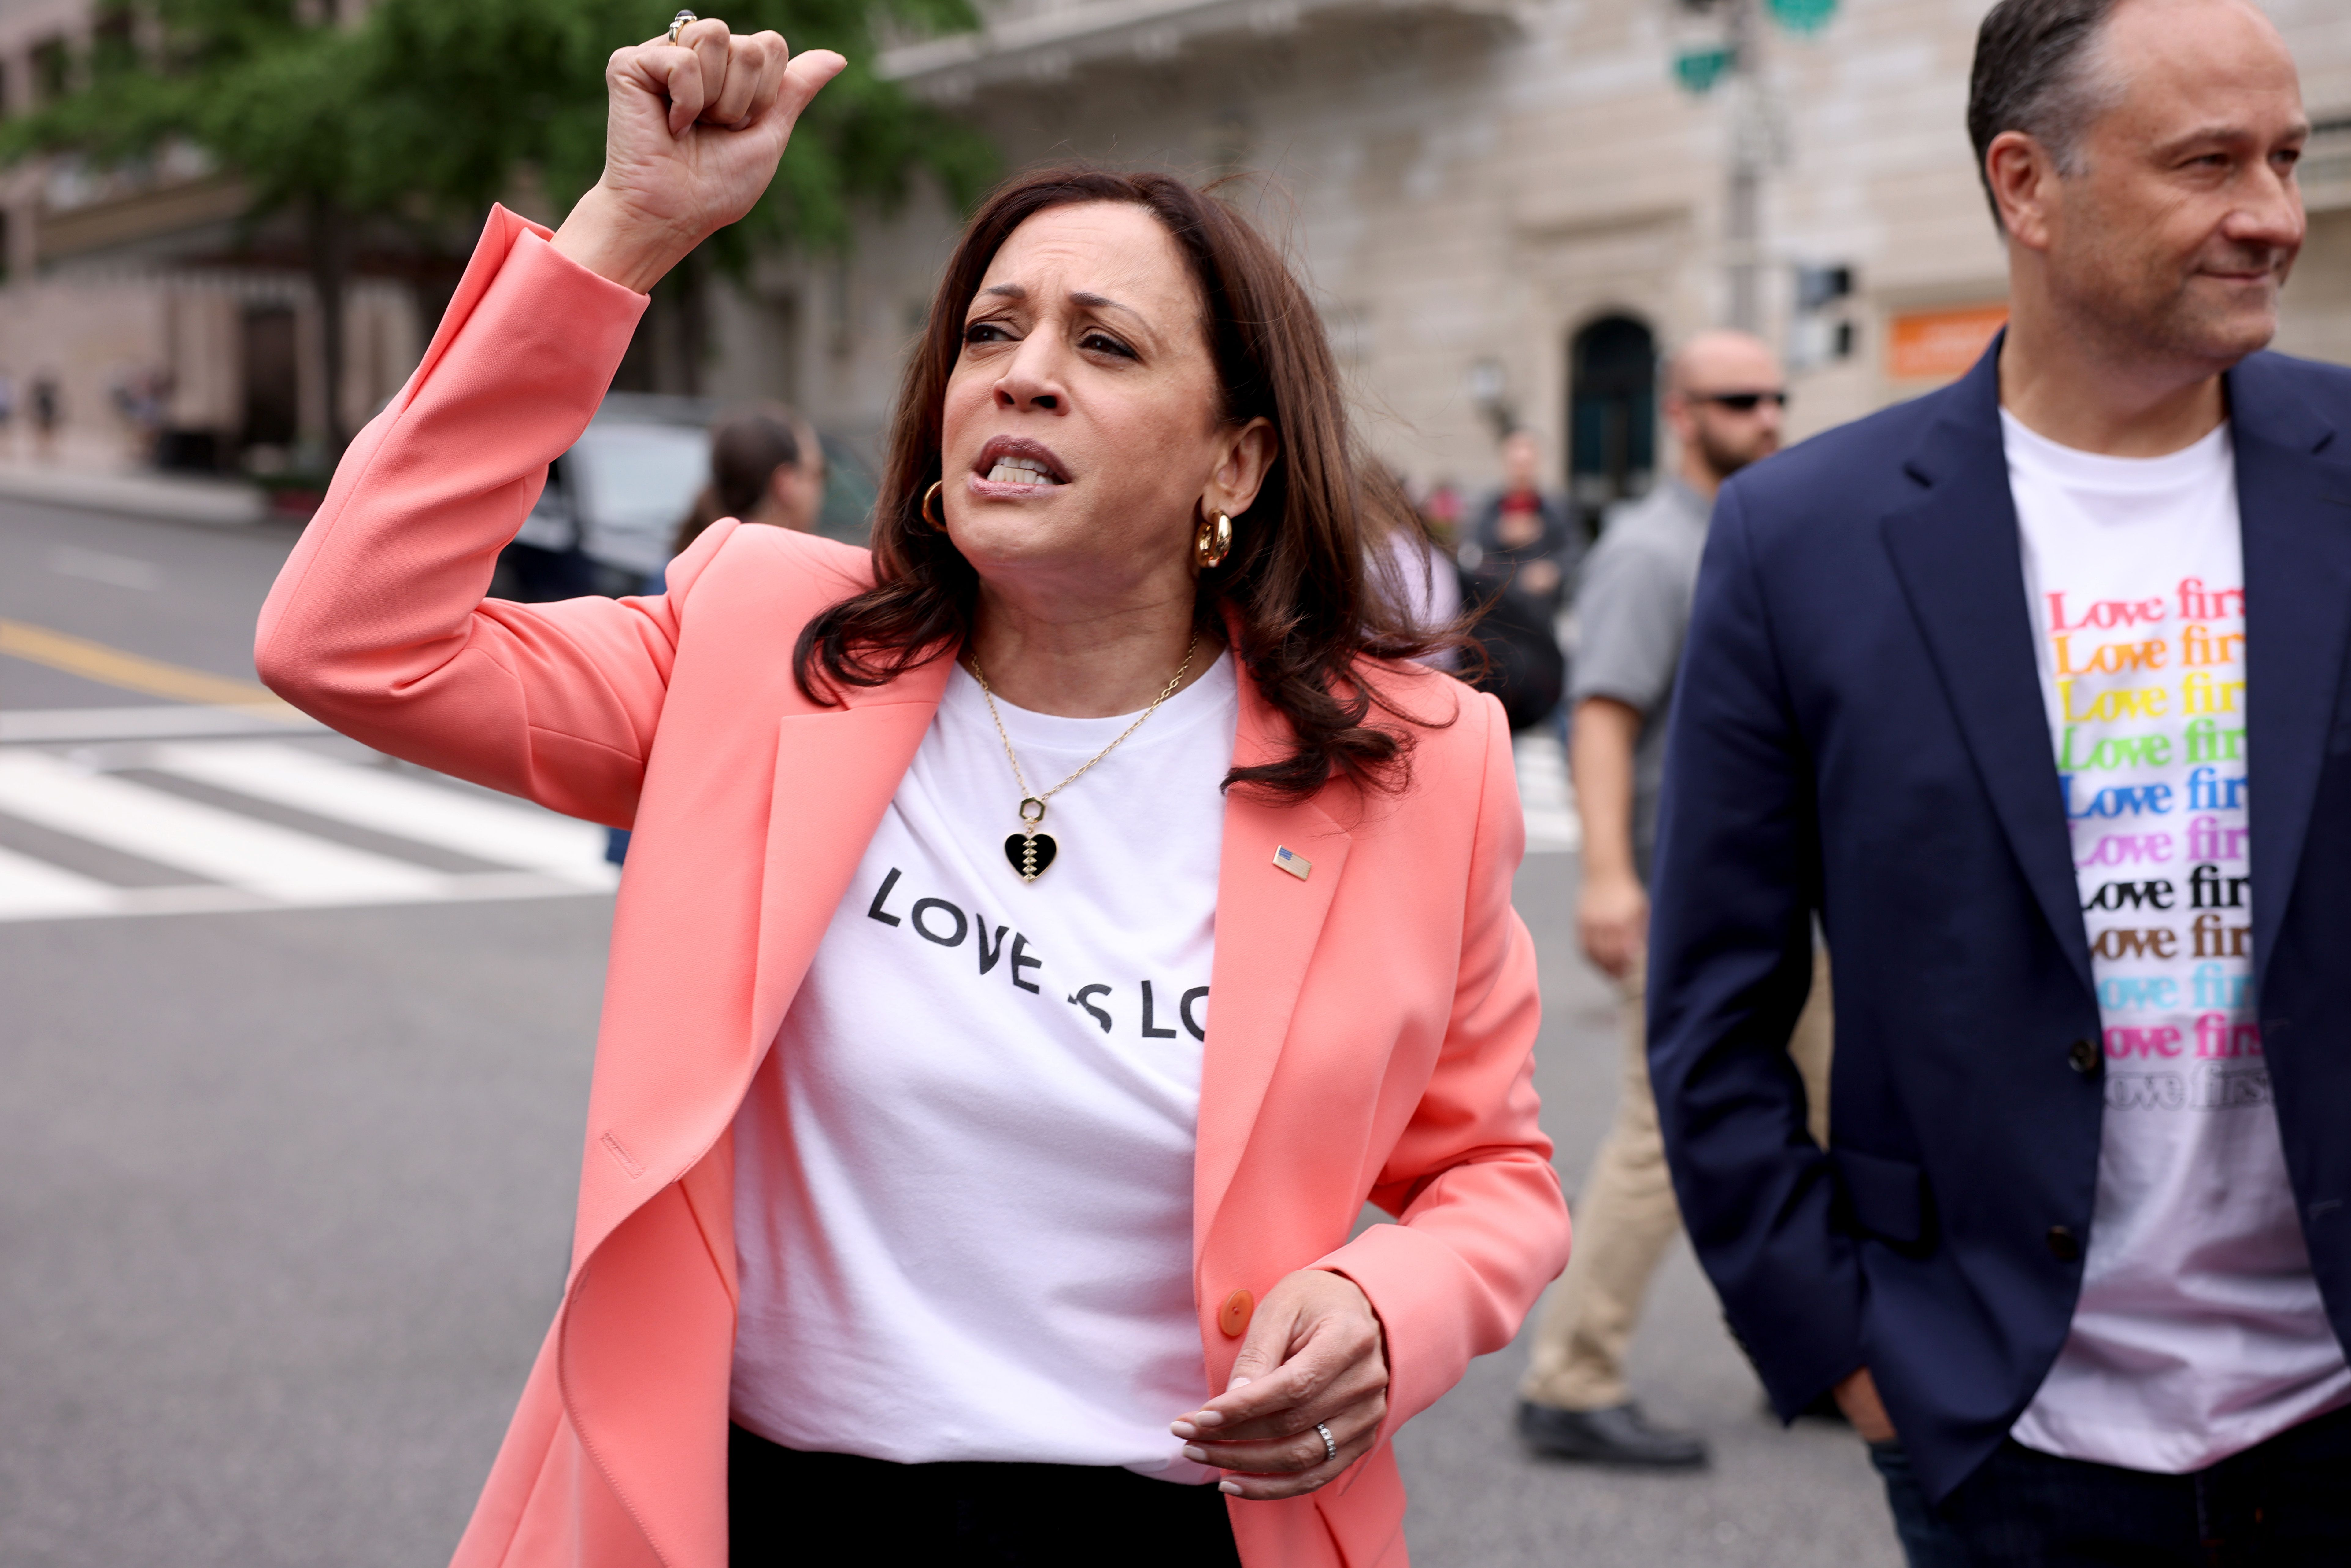 Harris speaks to marchers at pride parade 2021